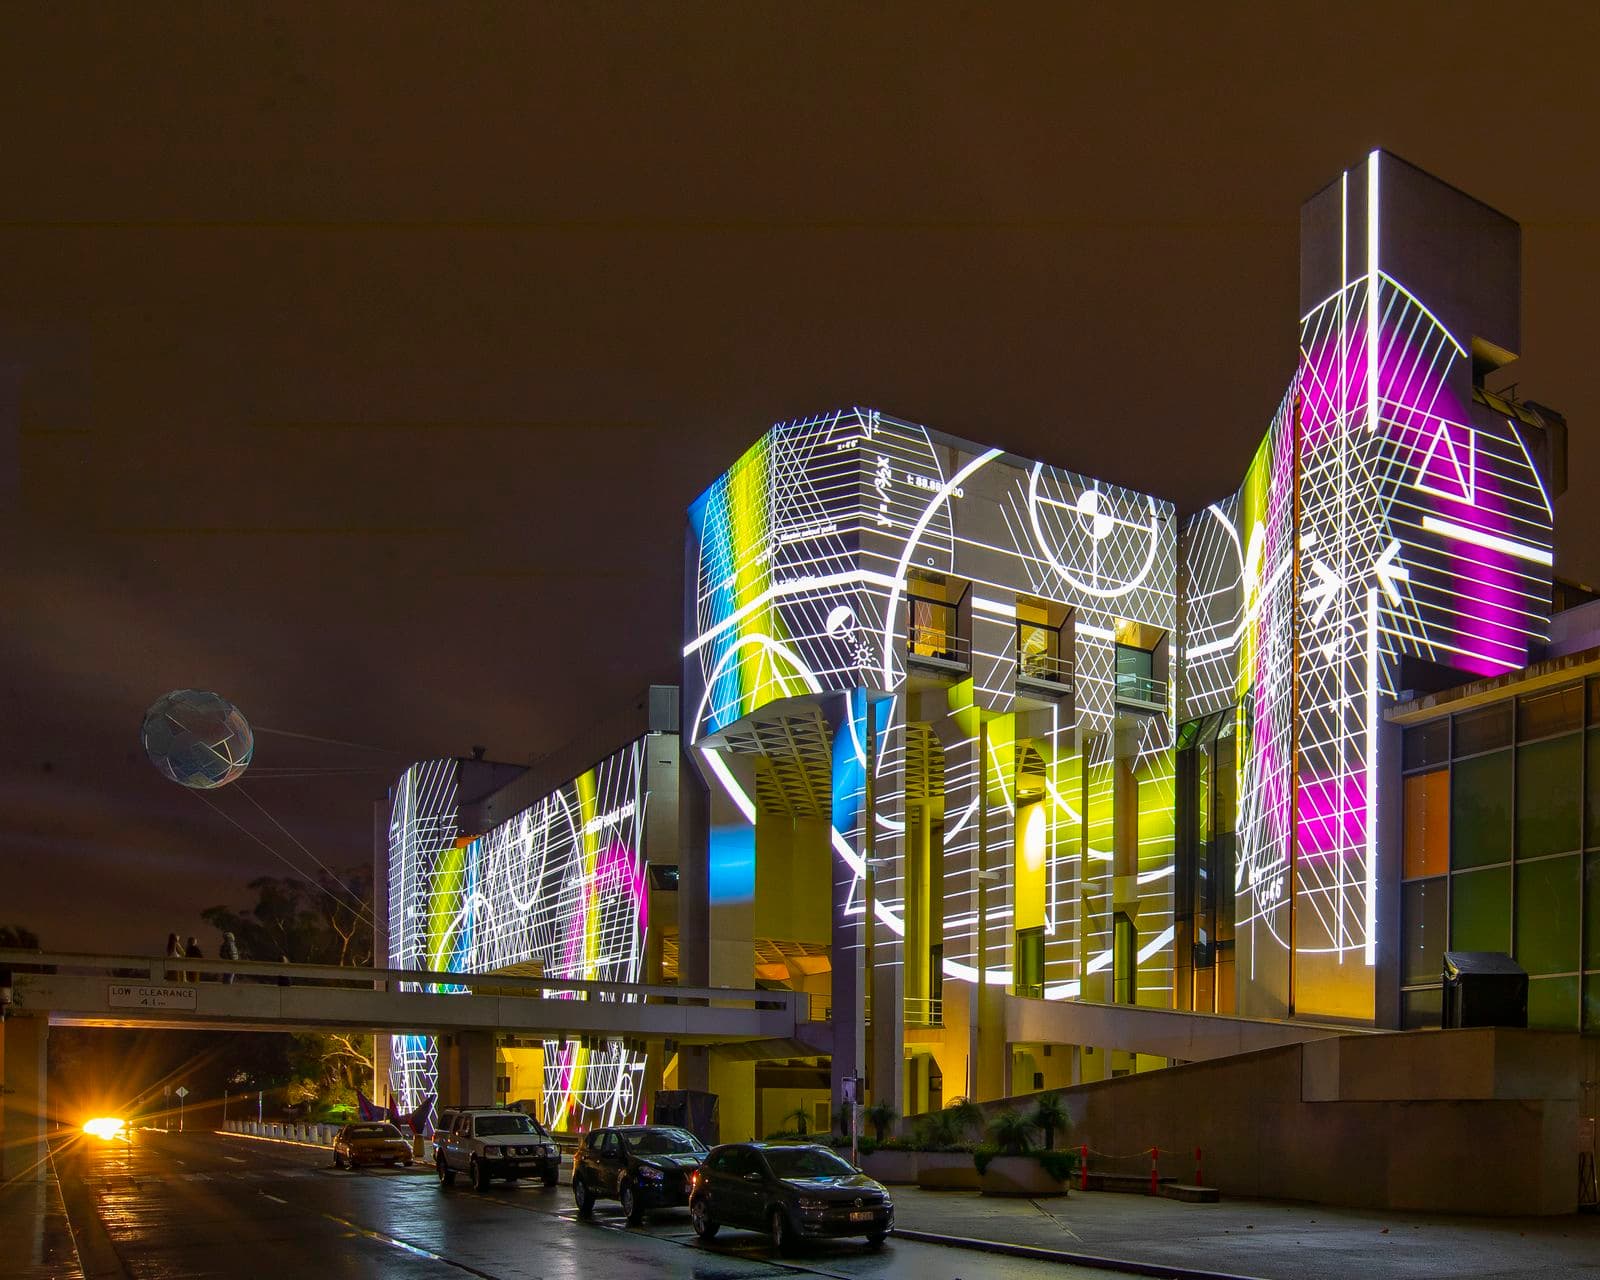 Colourful geometric work of art created in light is projected onto the brutalist concrete architecture of the National Gallery